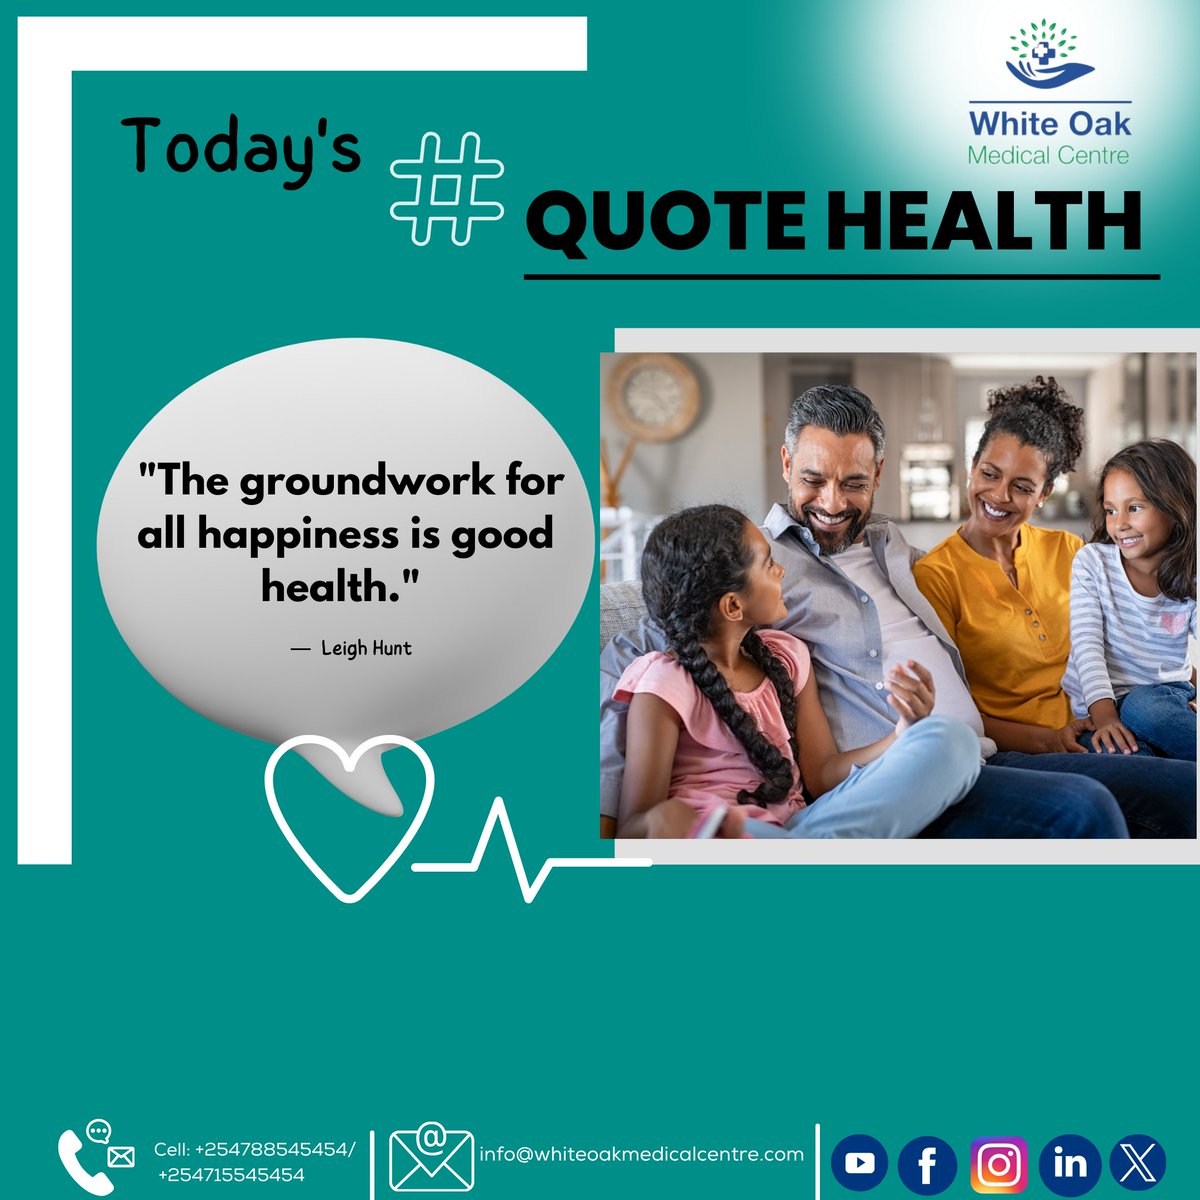 Prioritize your health – it's the key to unlocking a life full of joy.
Take advantage of our ongoing well woman & well man packages going for only Kshs. 16,000

Contact us on  +254715545454 to schedule your appointment.

#healthfirst
#goodhealth
#wellness